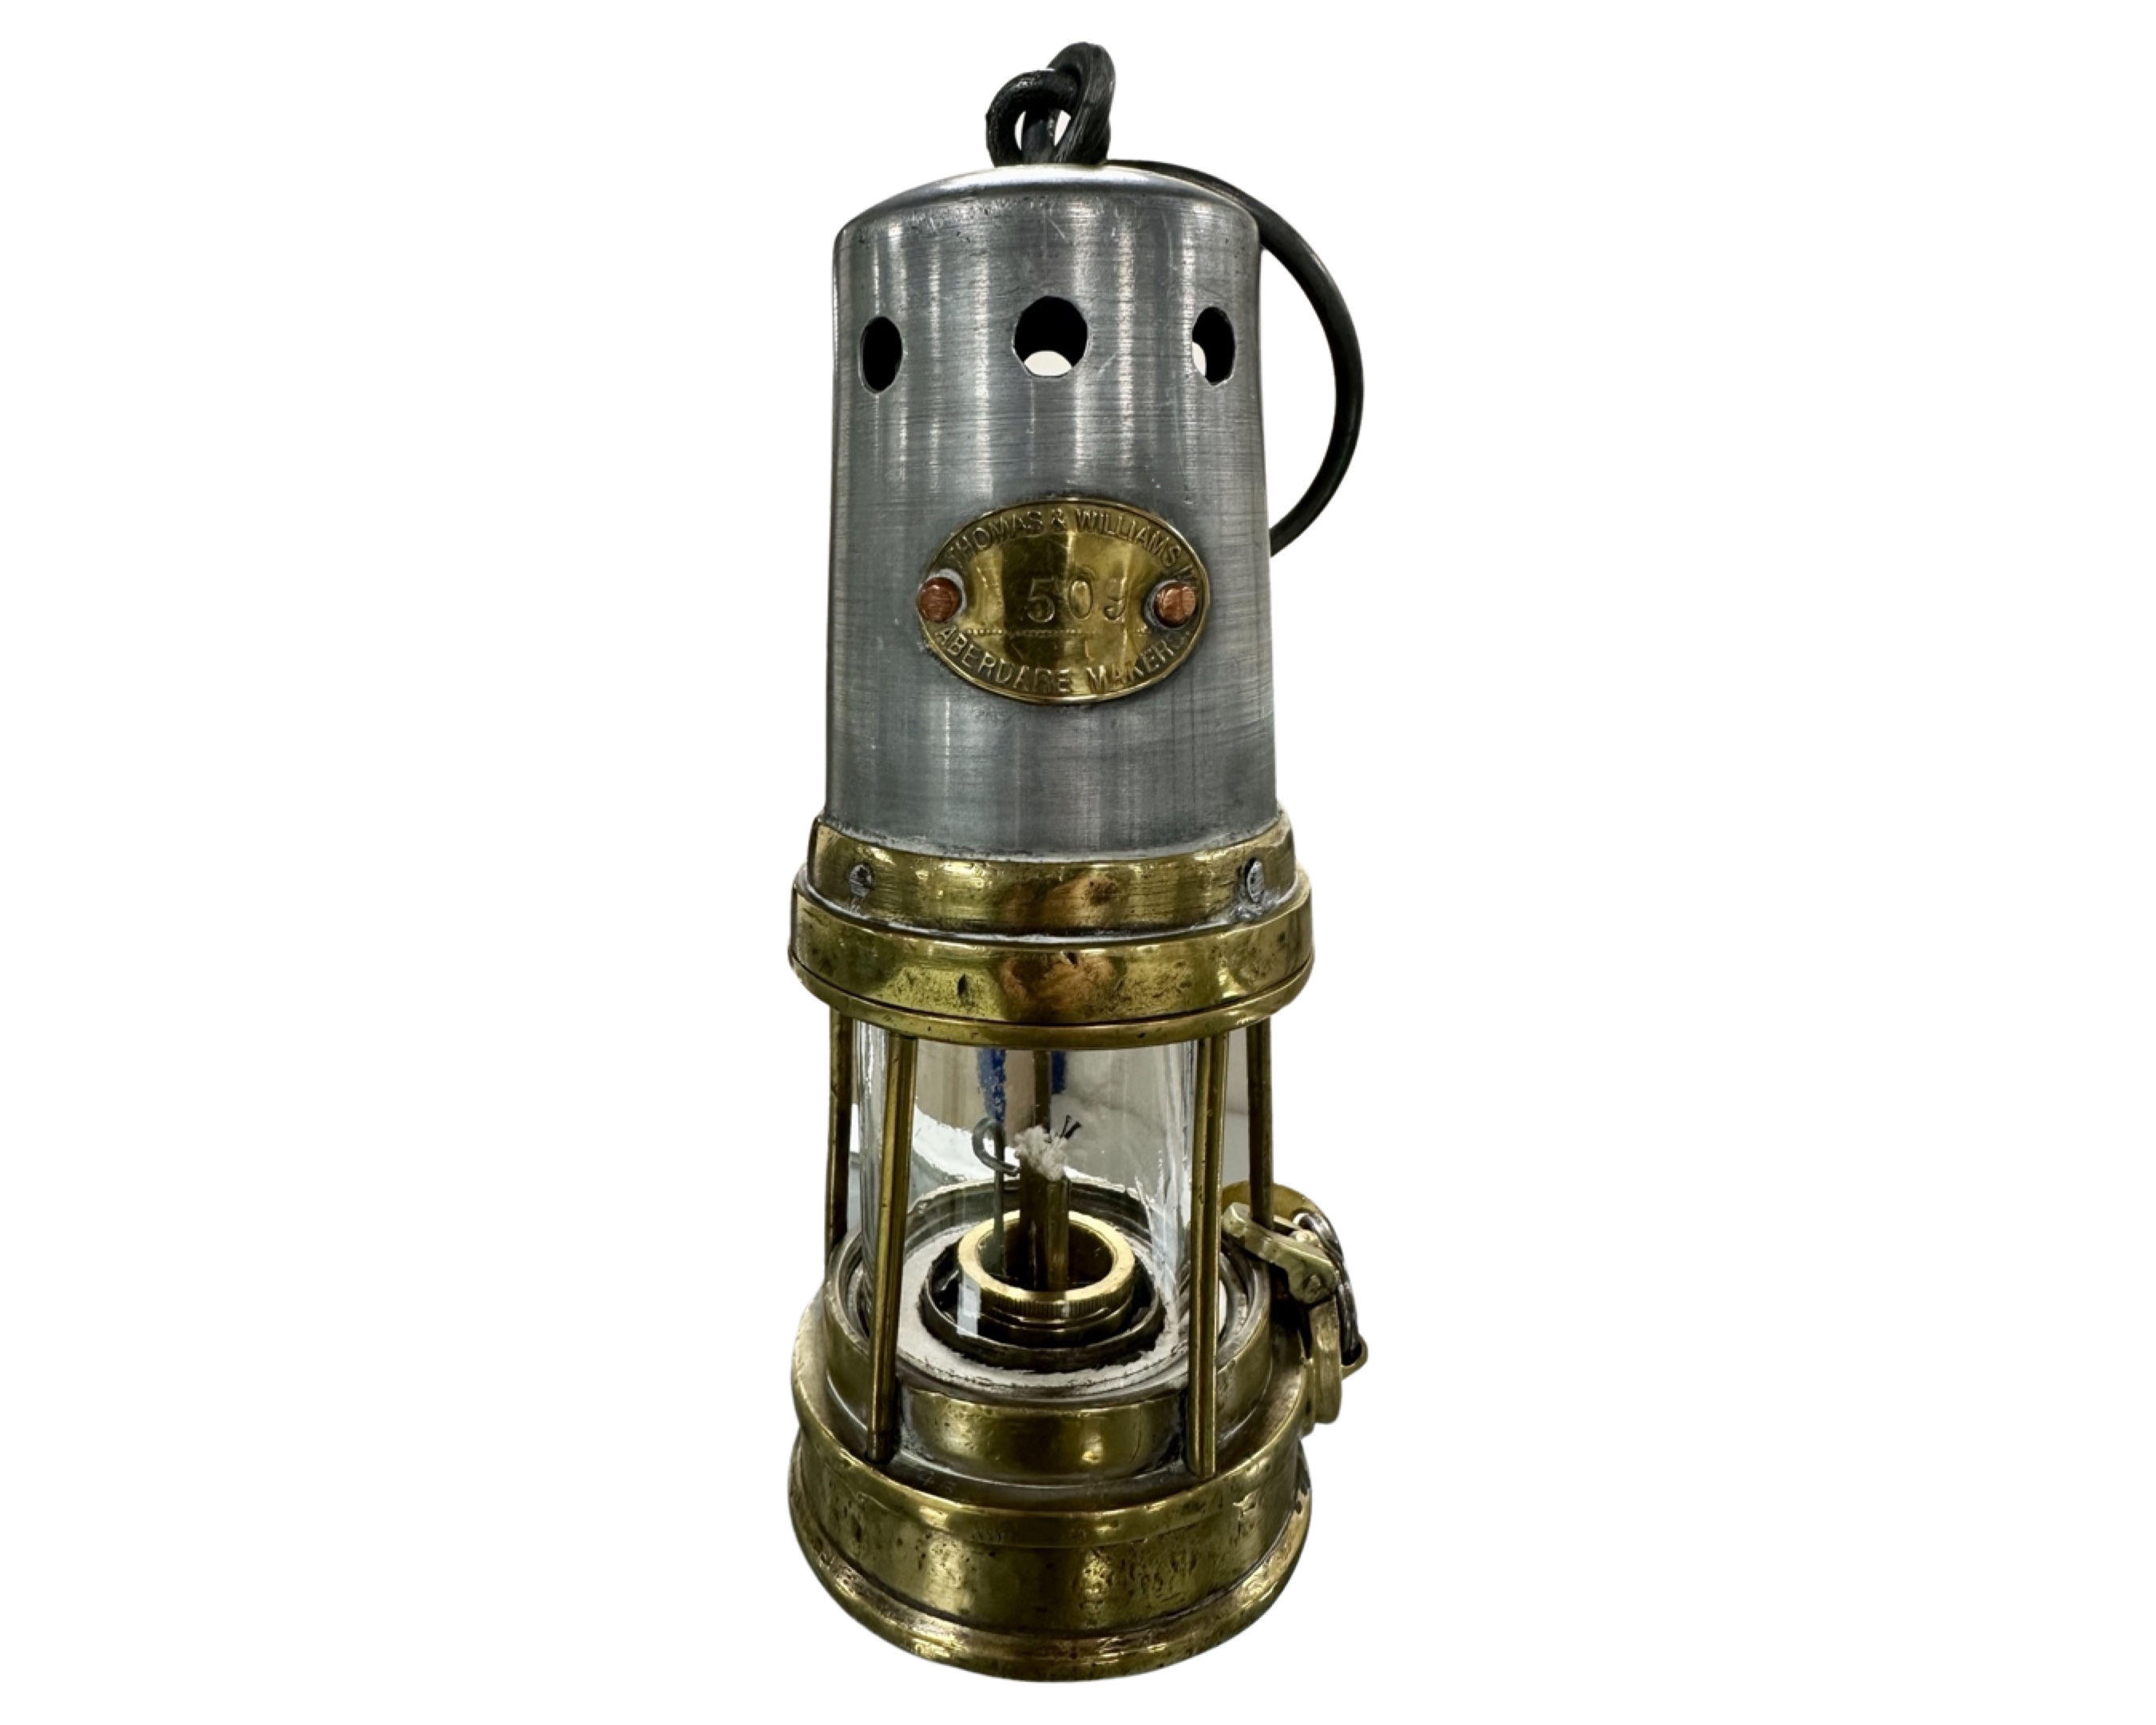 A vintage Thomas and Williams Aberdare miner's lamp, with numbered tag.